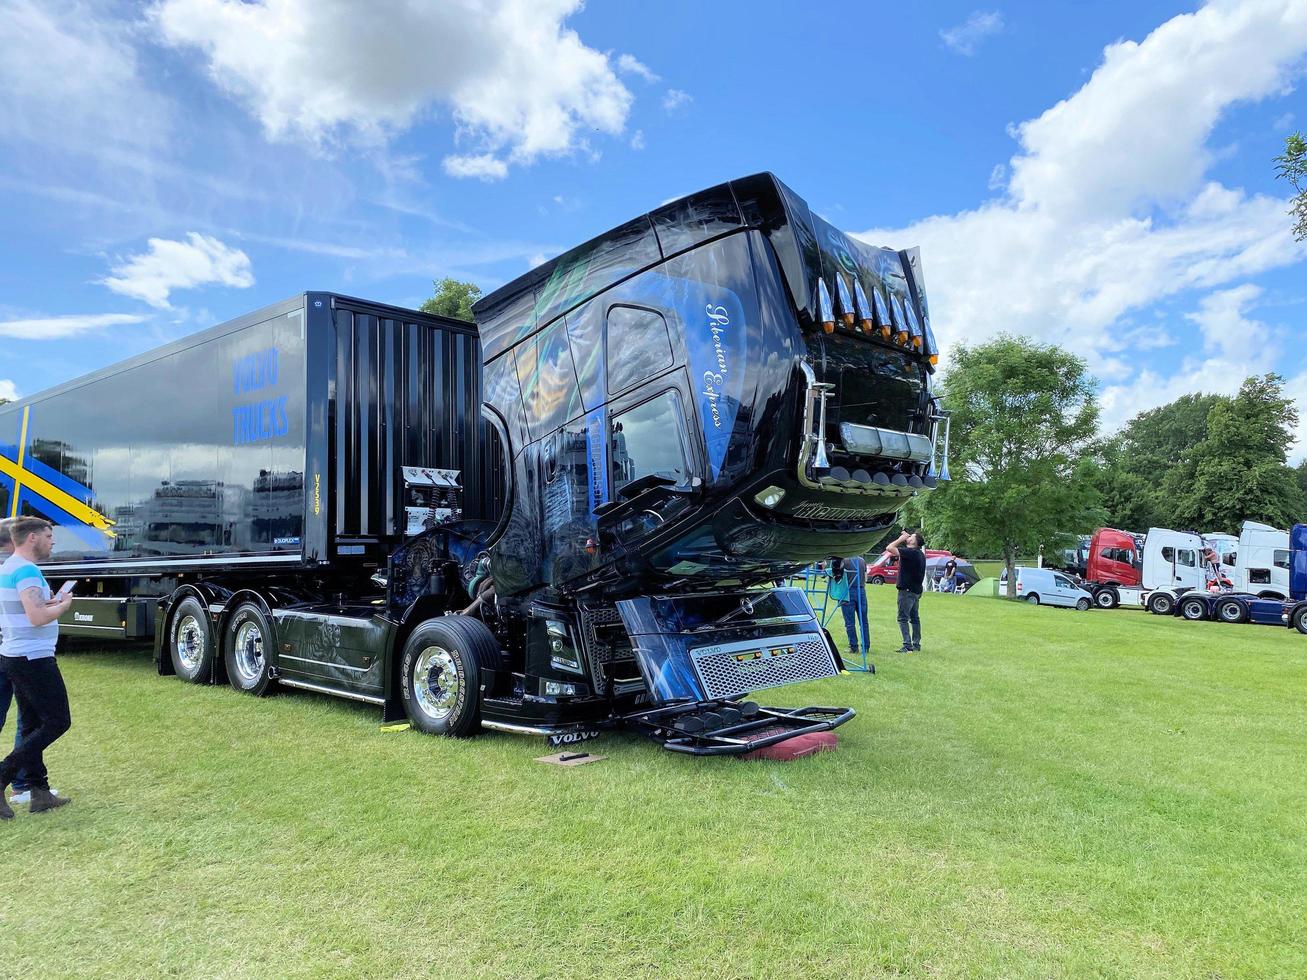 Whitchurch in the UK in June 2022. A view of a Truck at a Truck show photo